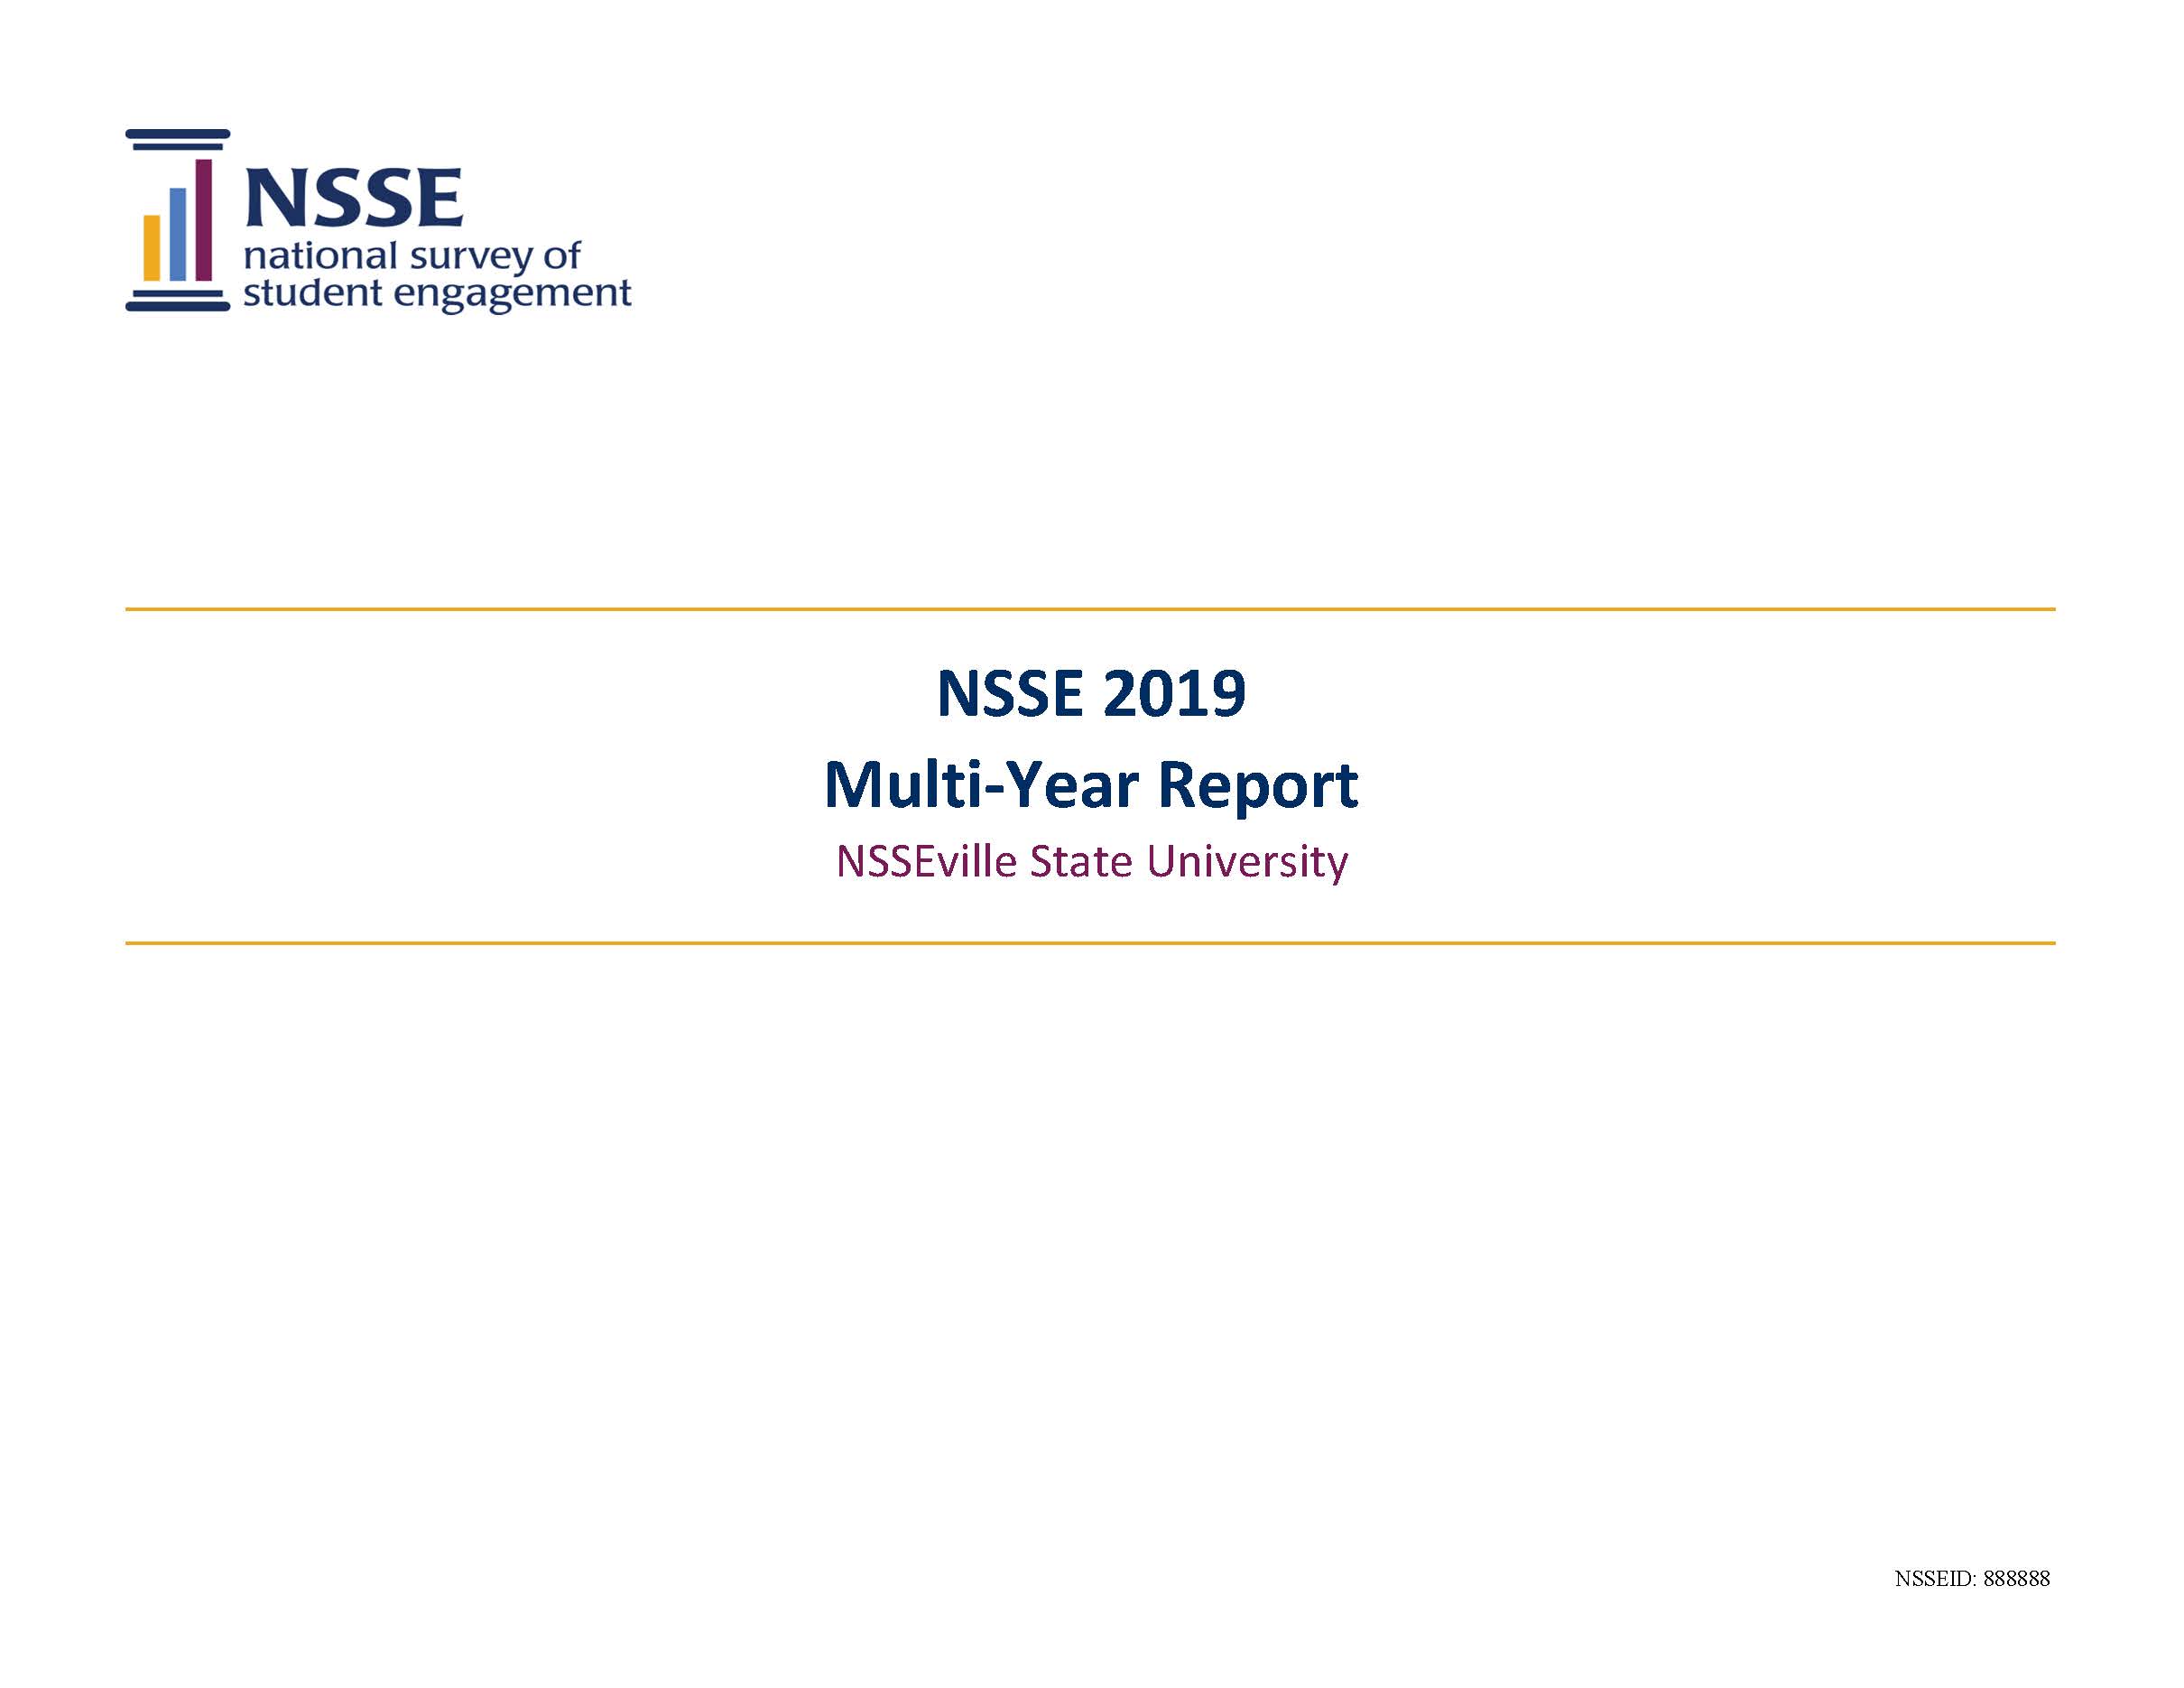 Sample Report: page 1 of NSSE Multi-Year Report